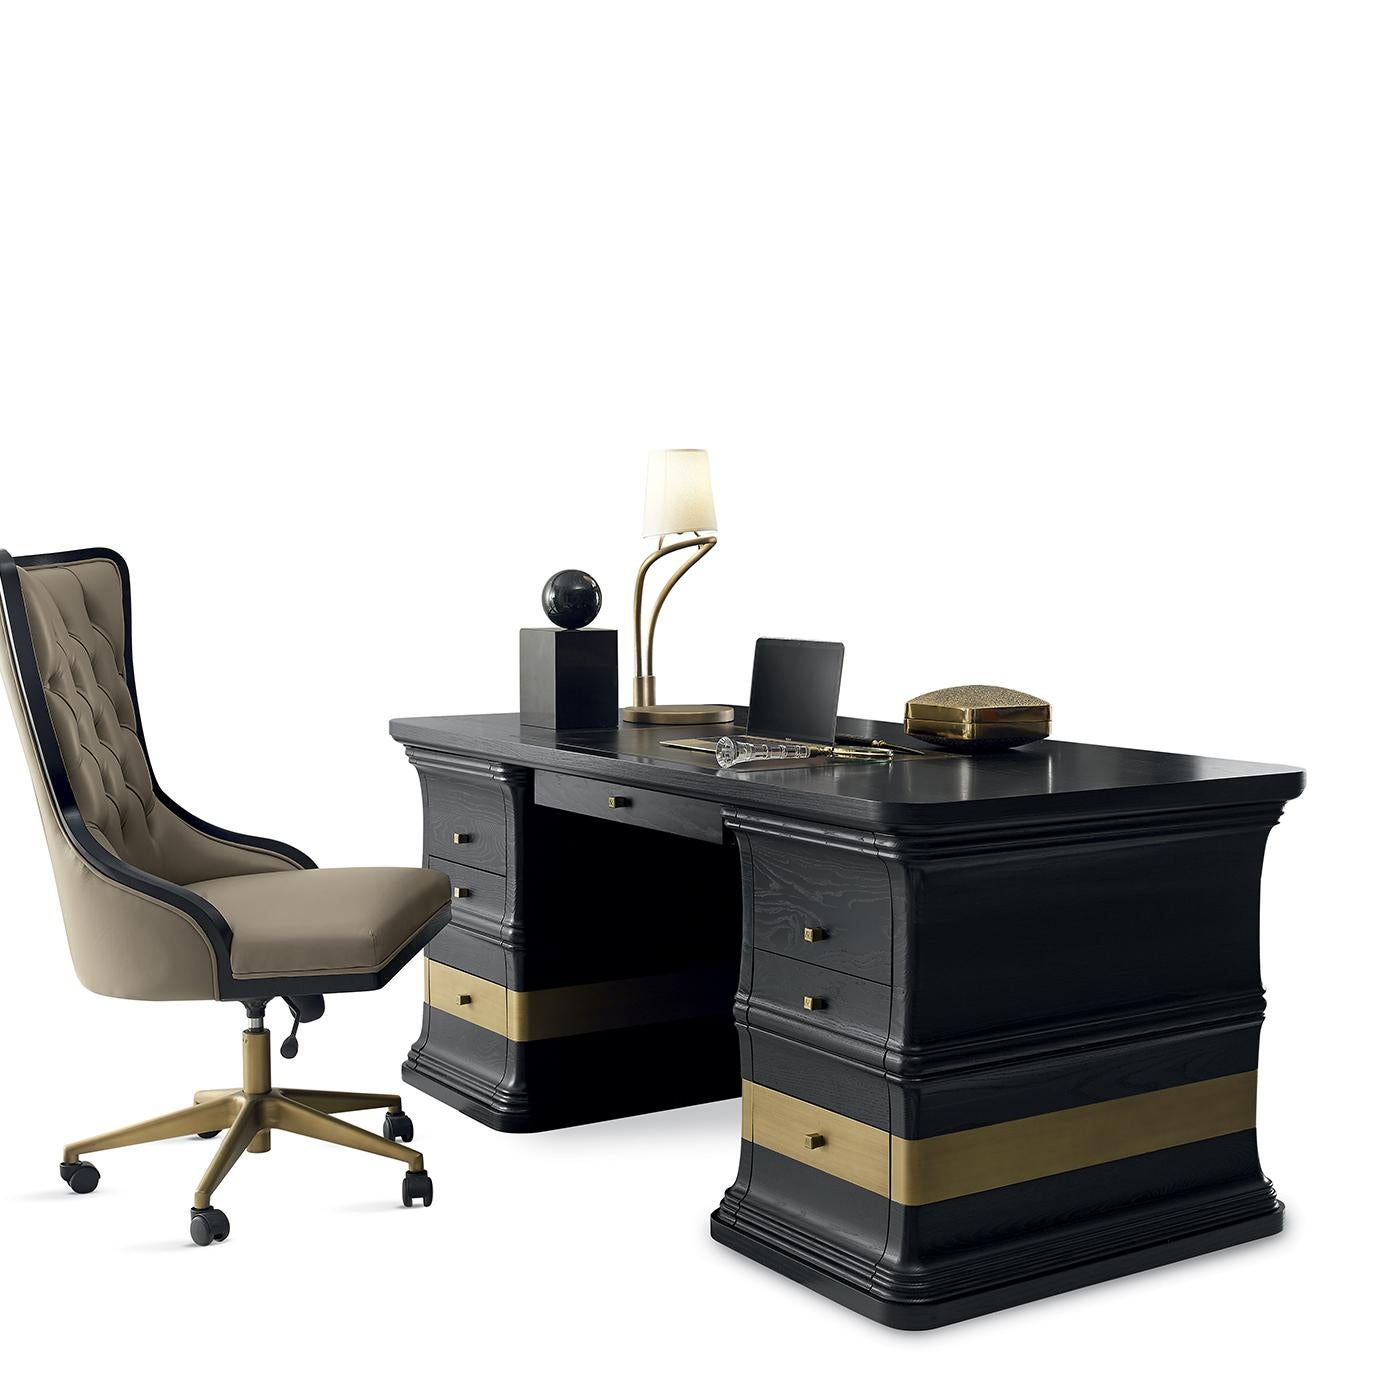 A refined piece of functional decor to be matched to any AR Arredamenti writing desk, this stunning swivel chair will elevate the look of a private study. Resting on a swiveling base of burnished brass, the black-lacquered ashwood seat features a